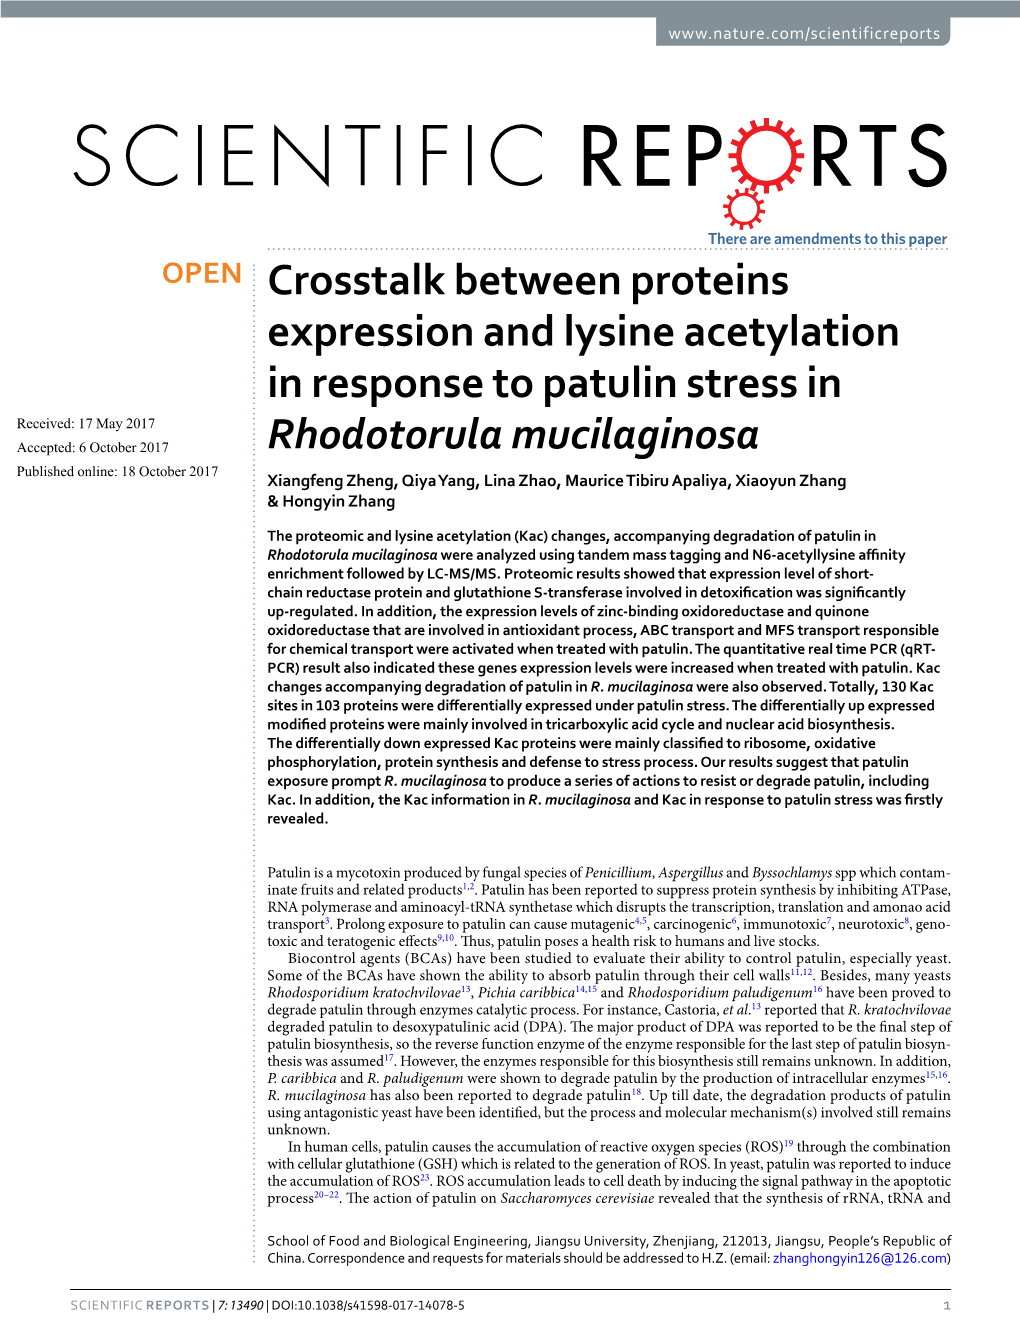 Crosstalk Between Proteins Expression and Lysine Acetylation In